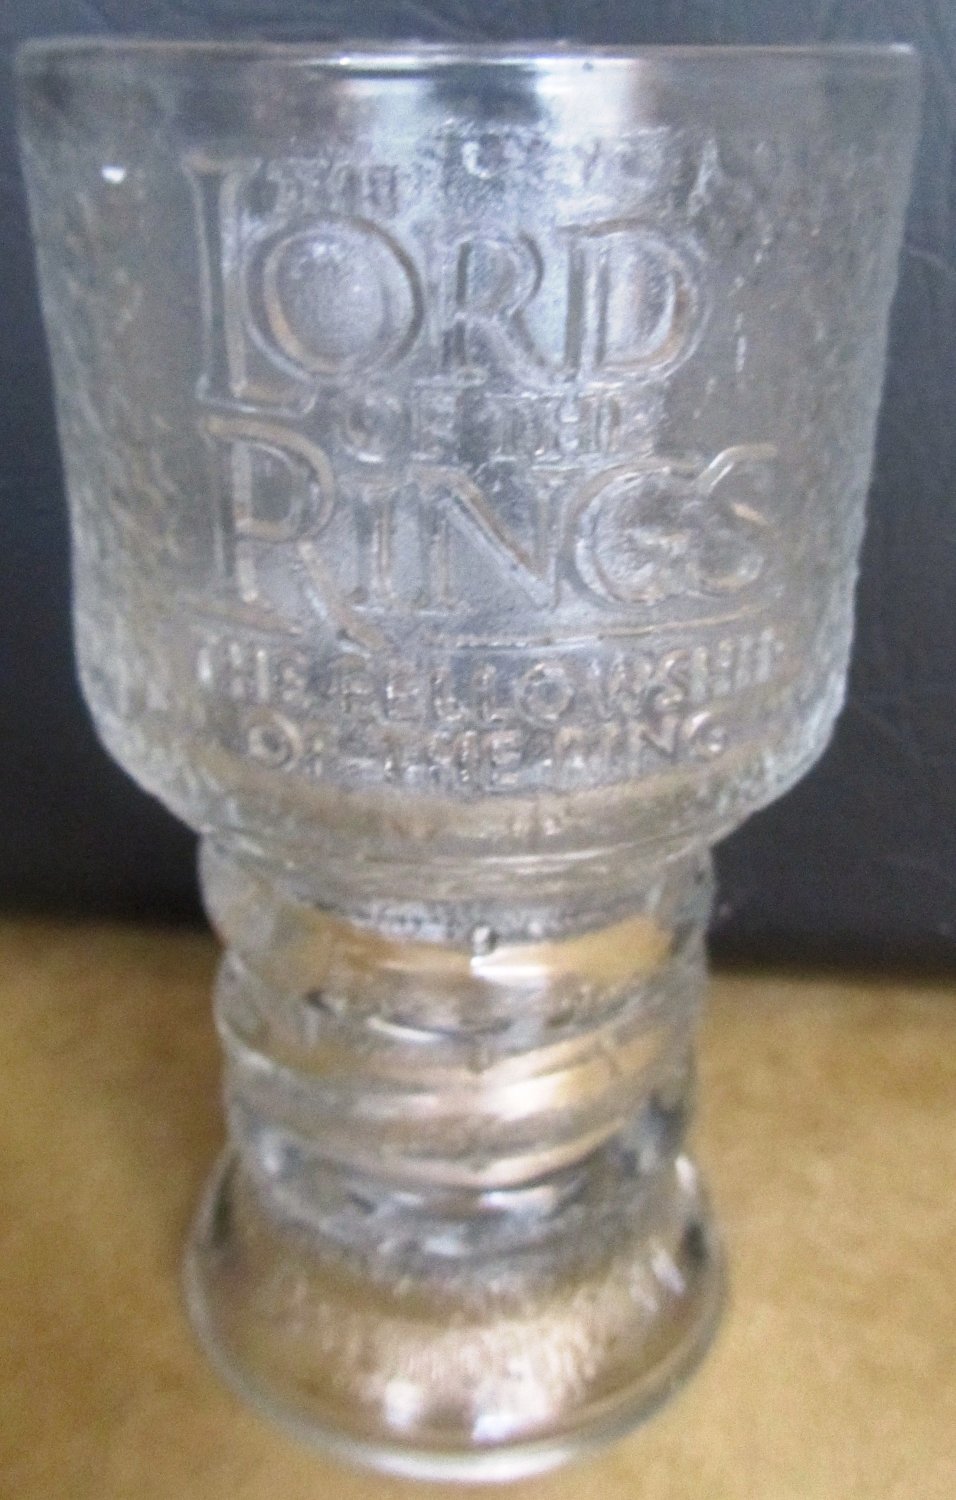 COMMEMORATIVE LORD OF THE RINGS GLASS GOBLET WATER TUMBLER Strider The Ranger